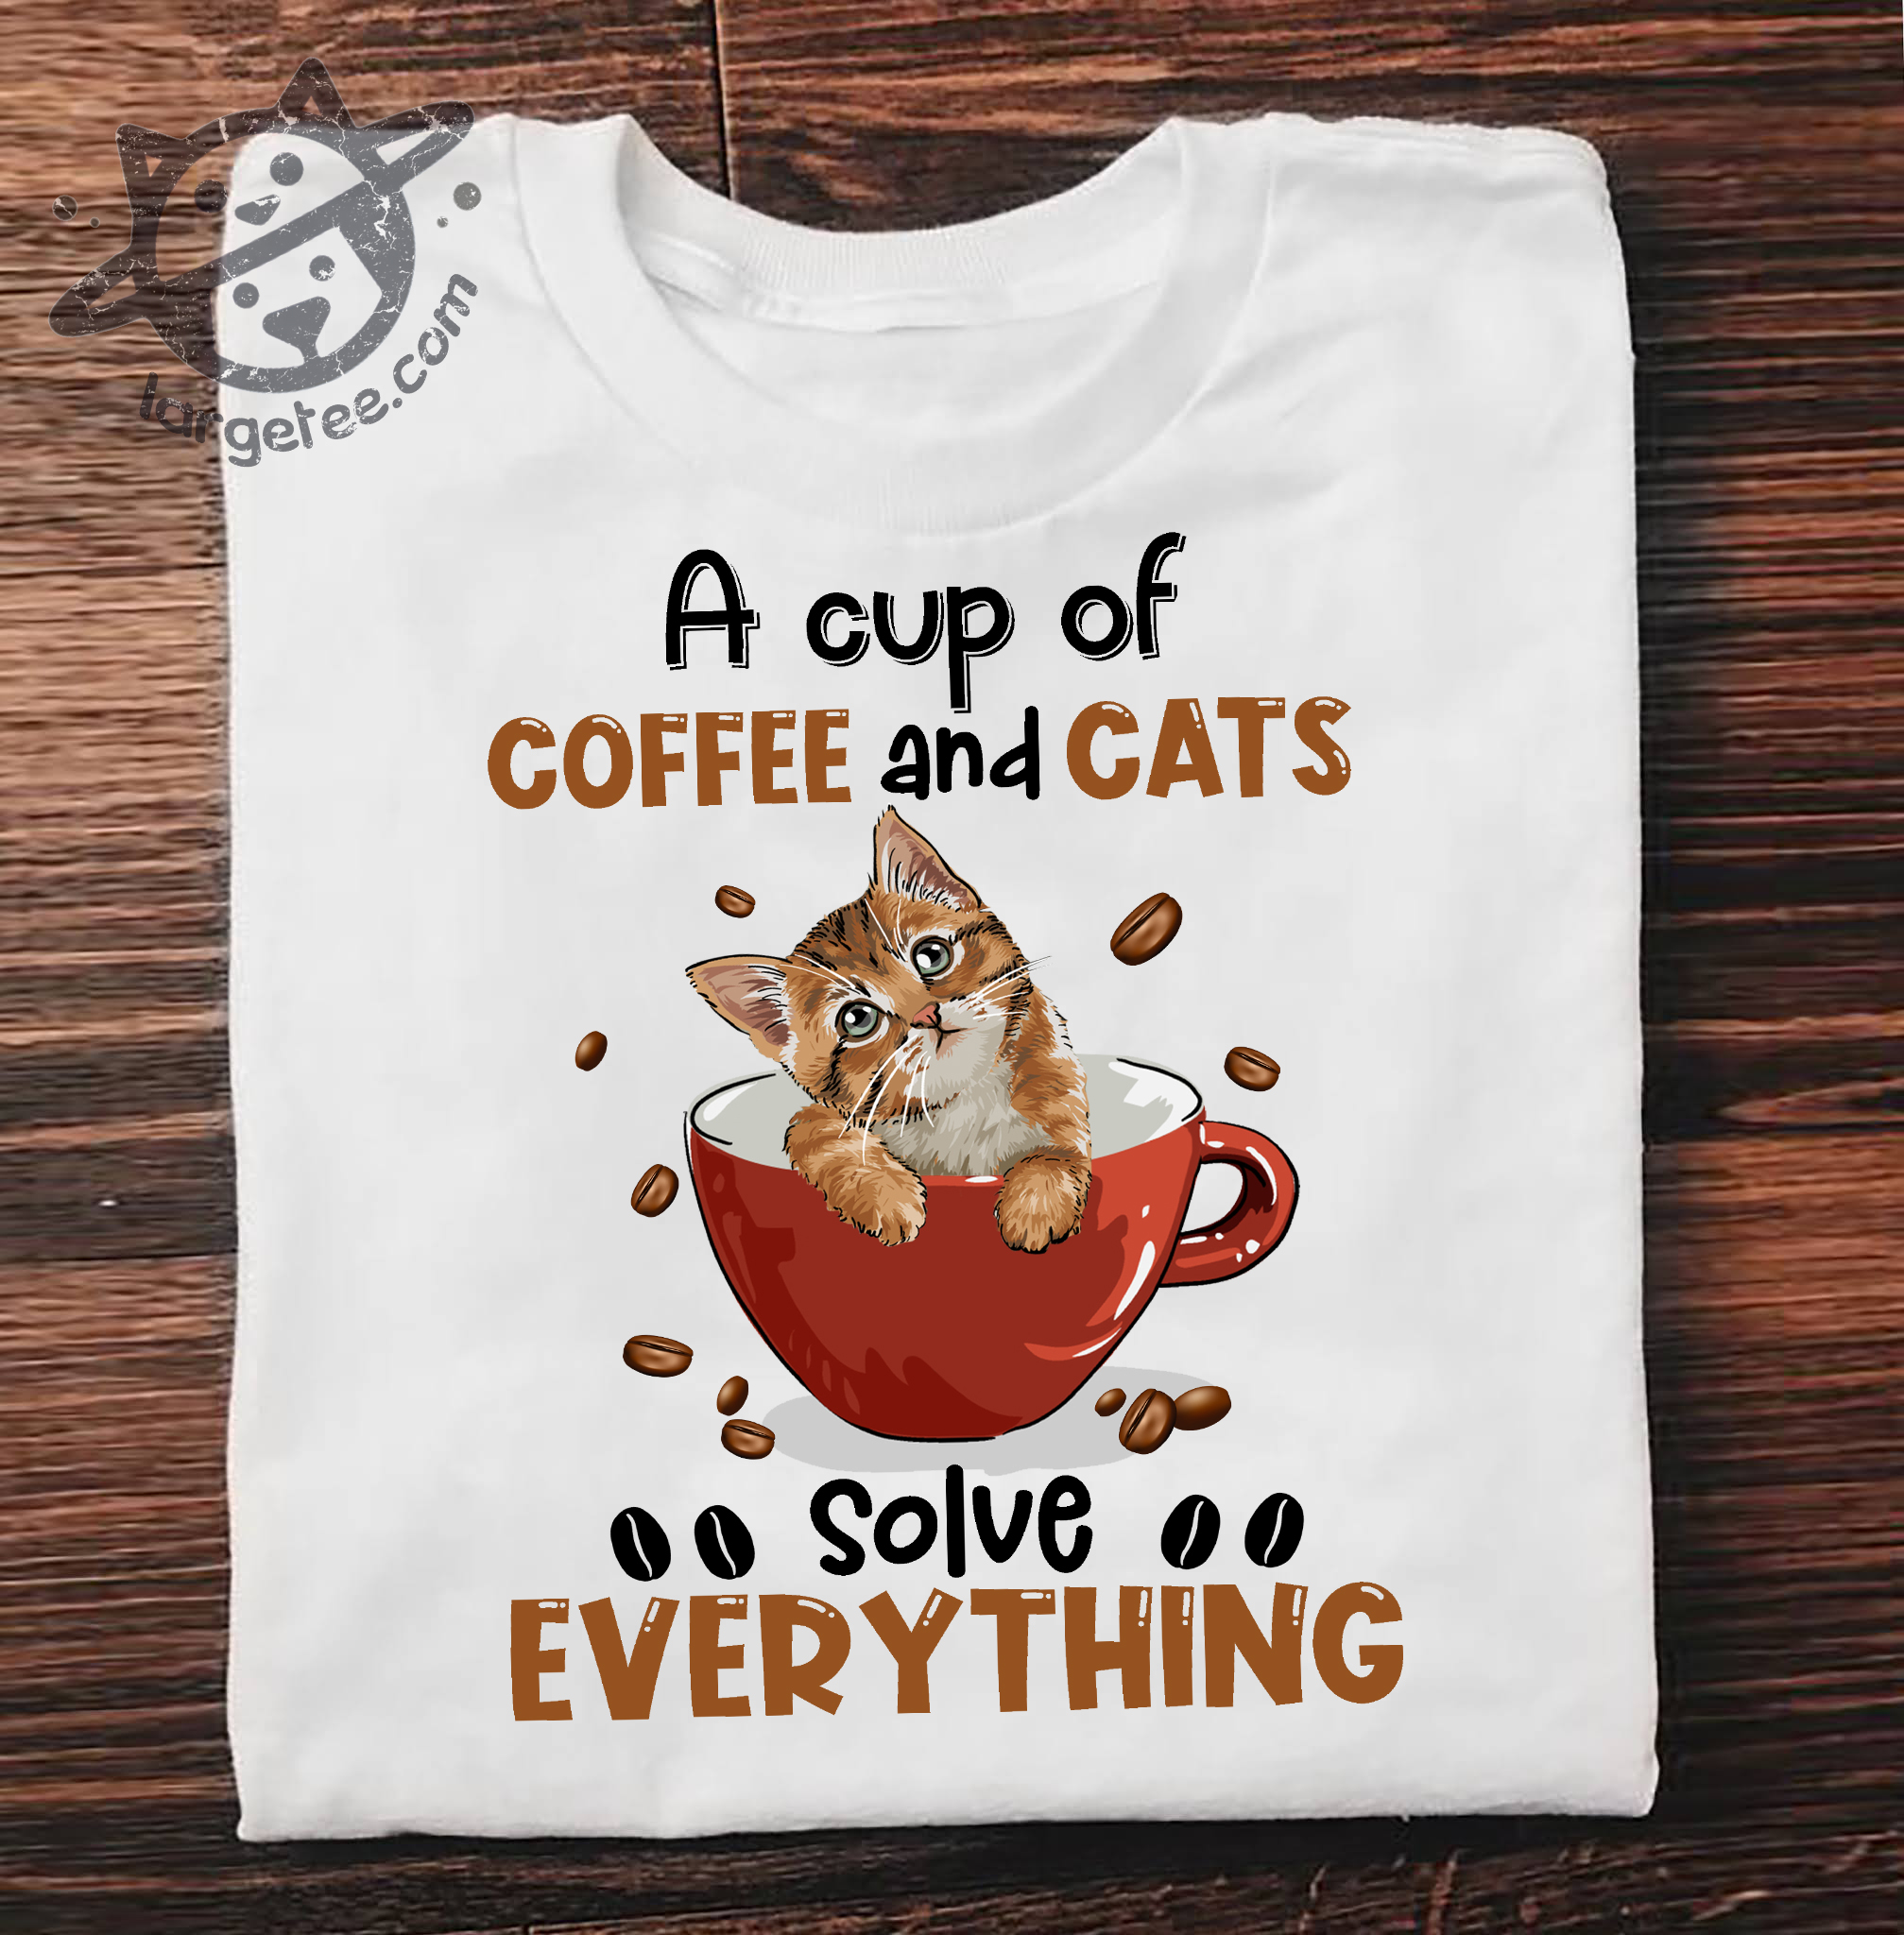 A cup of coffee and cats solve everything